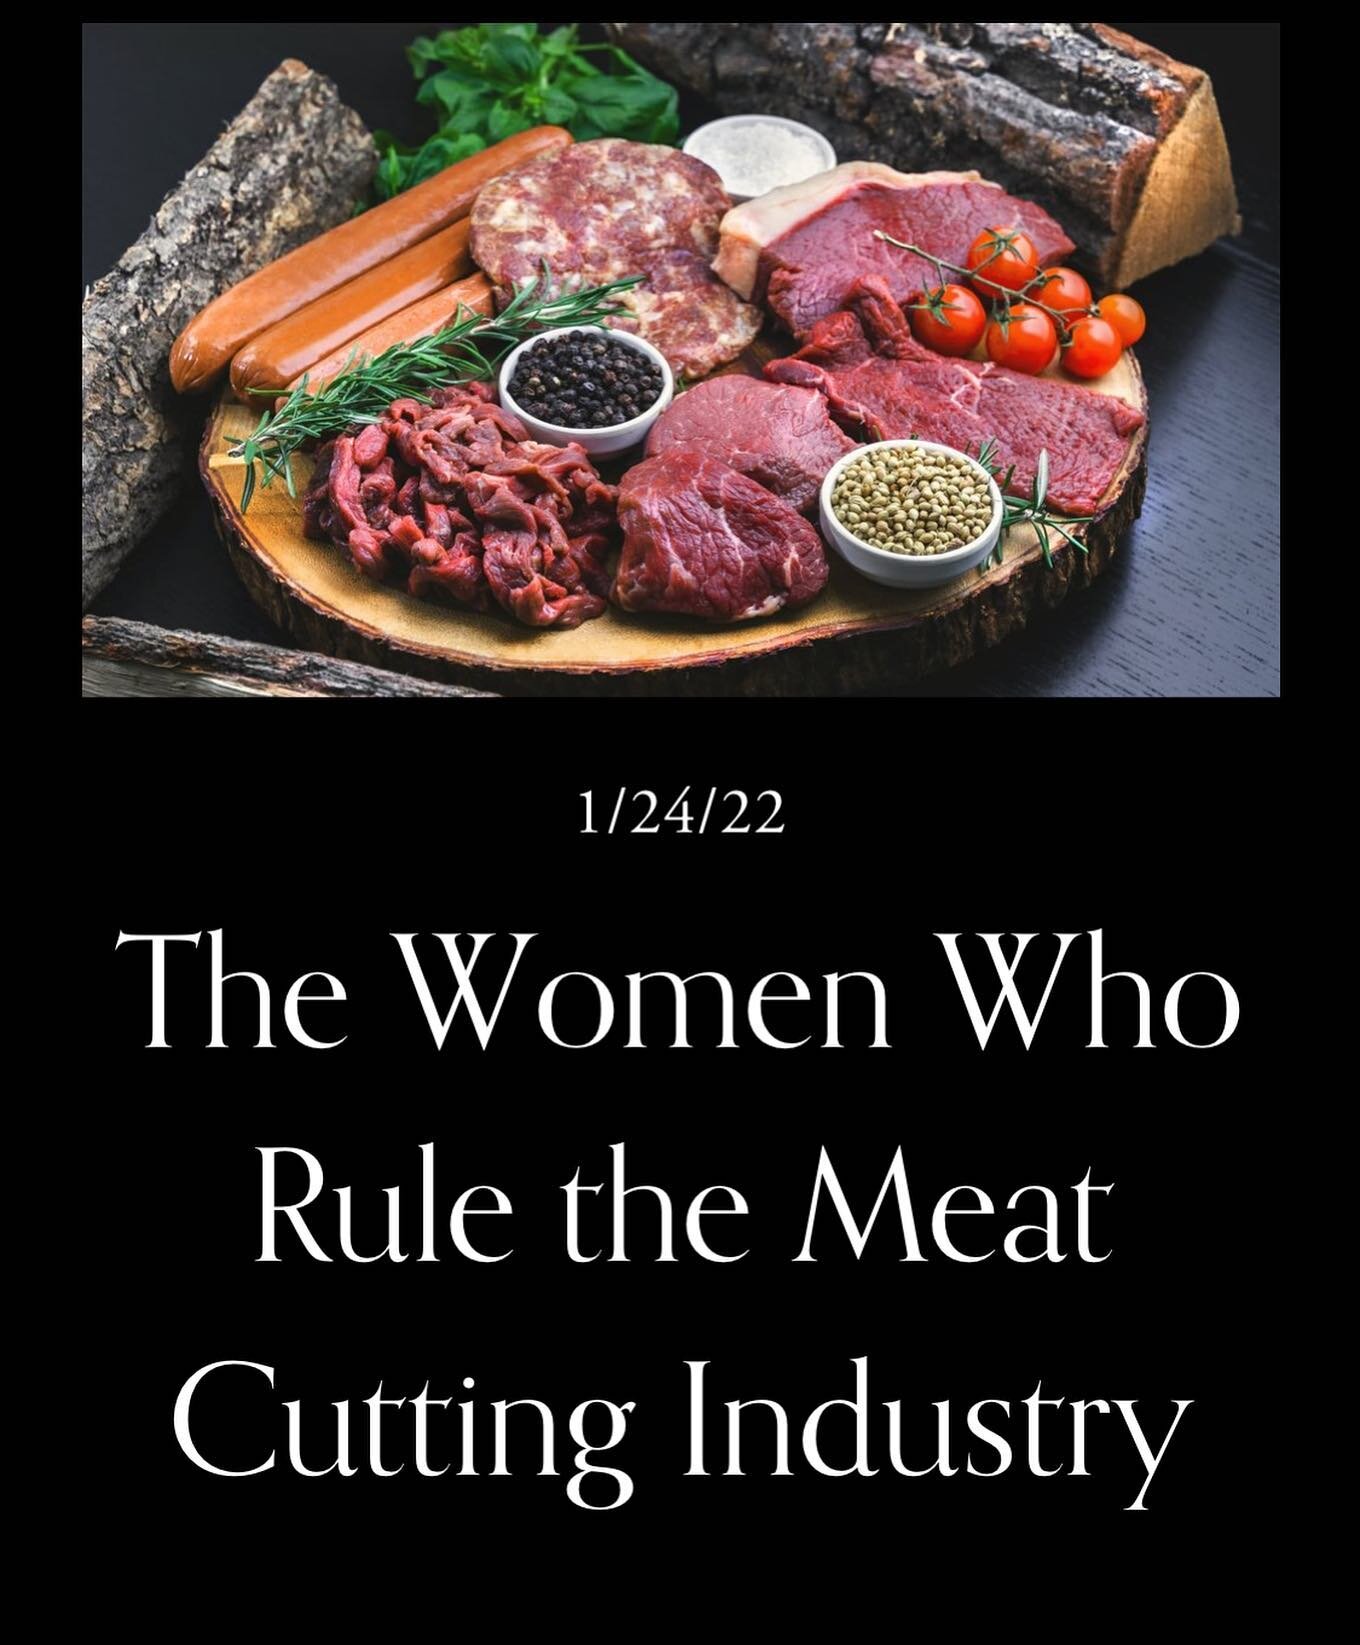 Lady Butchers Rock!!

My latest article is finished and published on my web page. Please go to www.redbeardbutcher.com and give it a read. It will only take a few minutes and hopefully introduce you to some amazing butchers in the process. 

Our indu